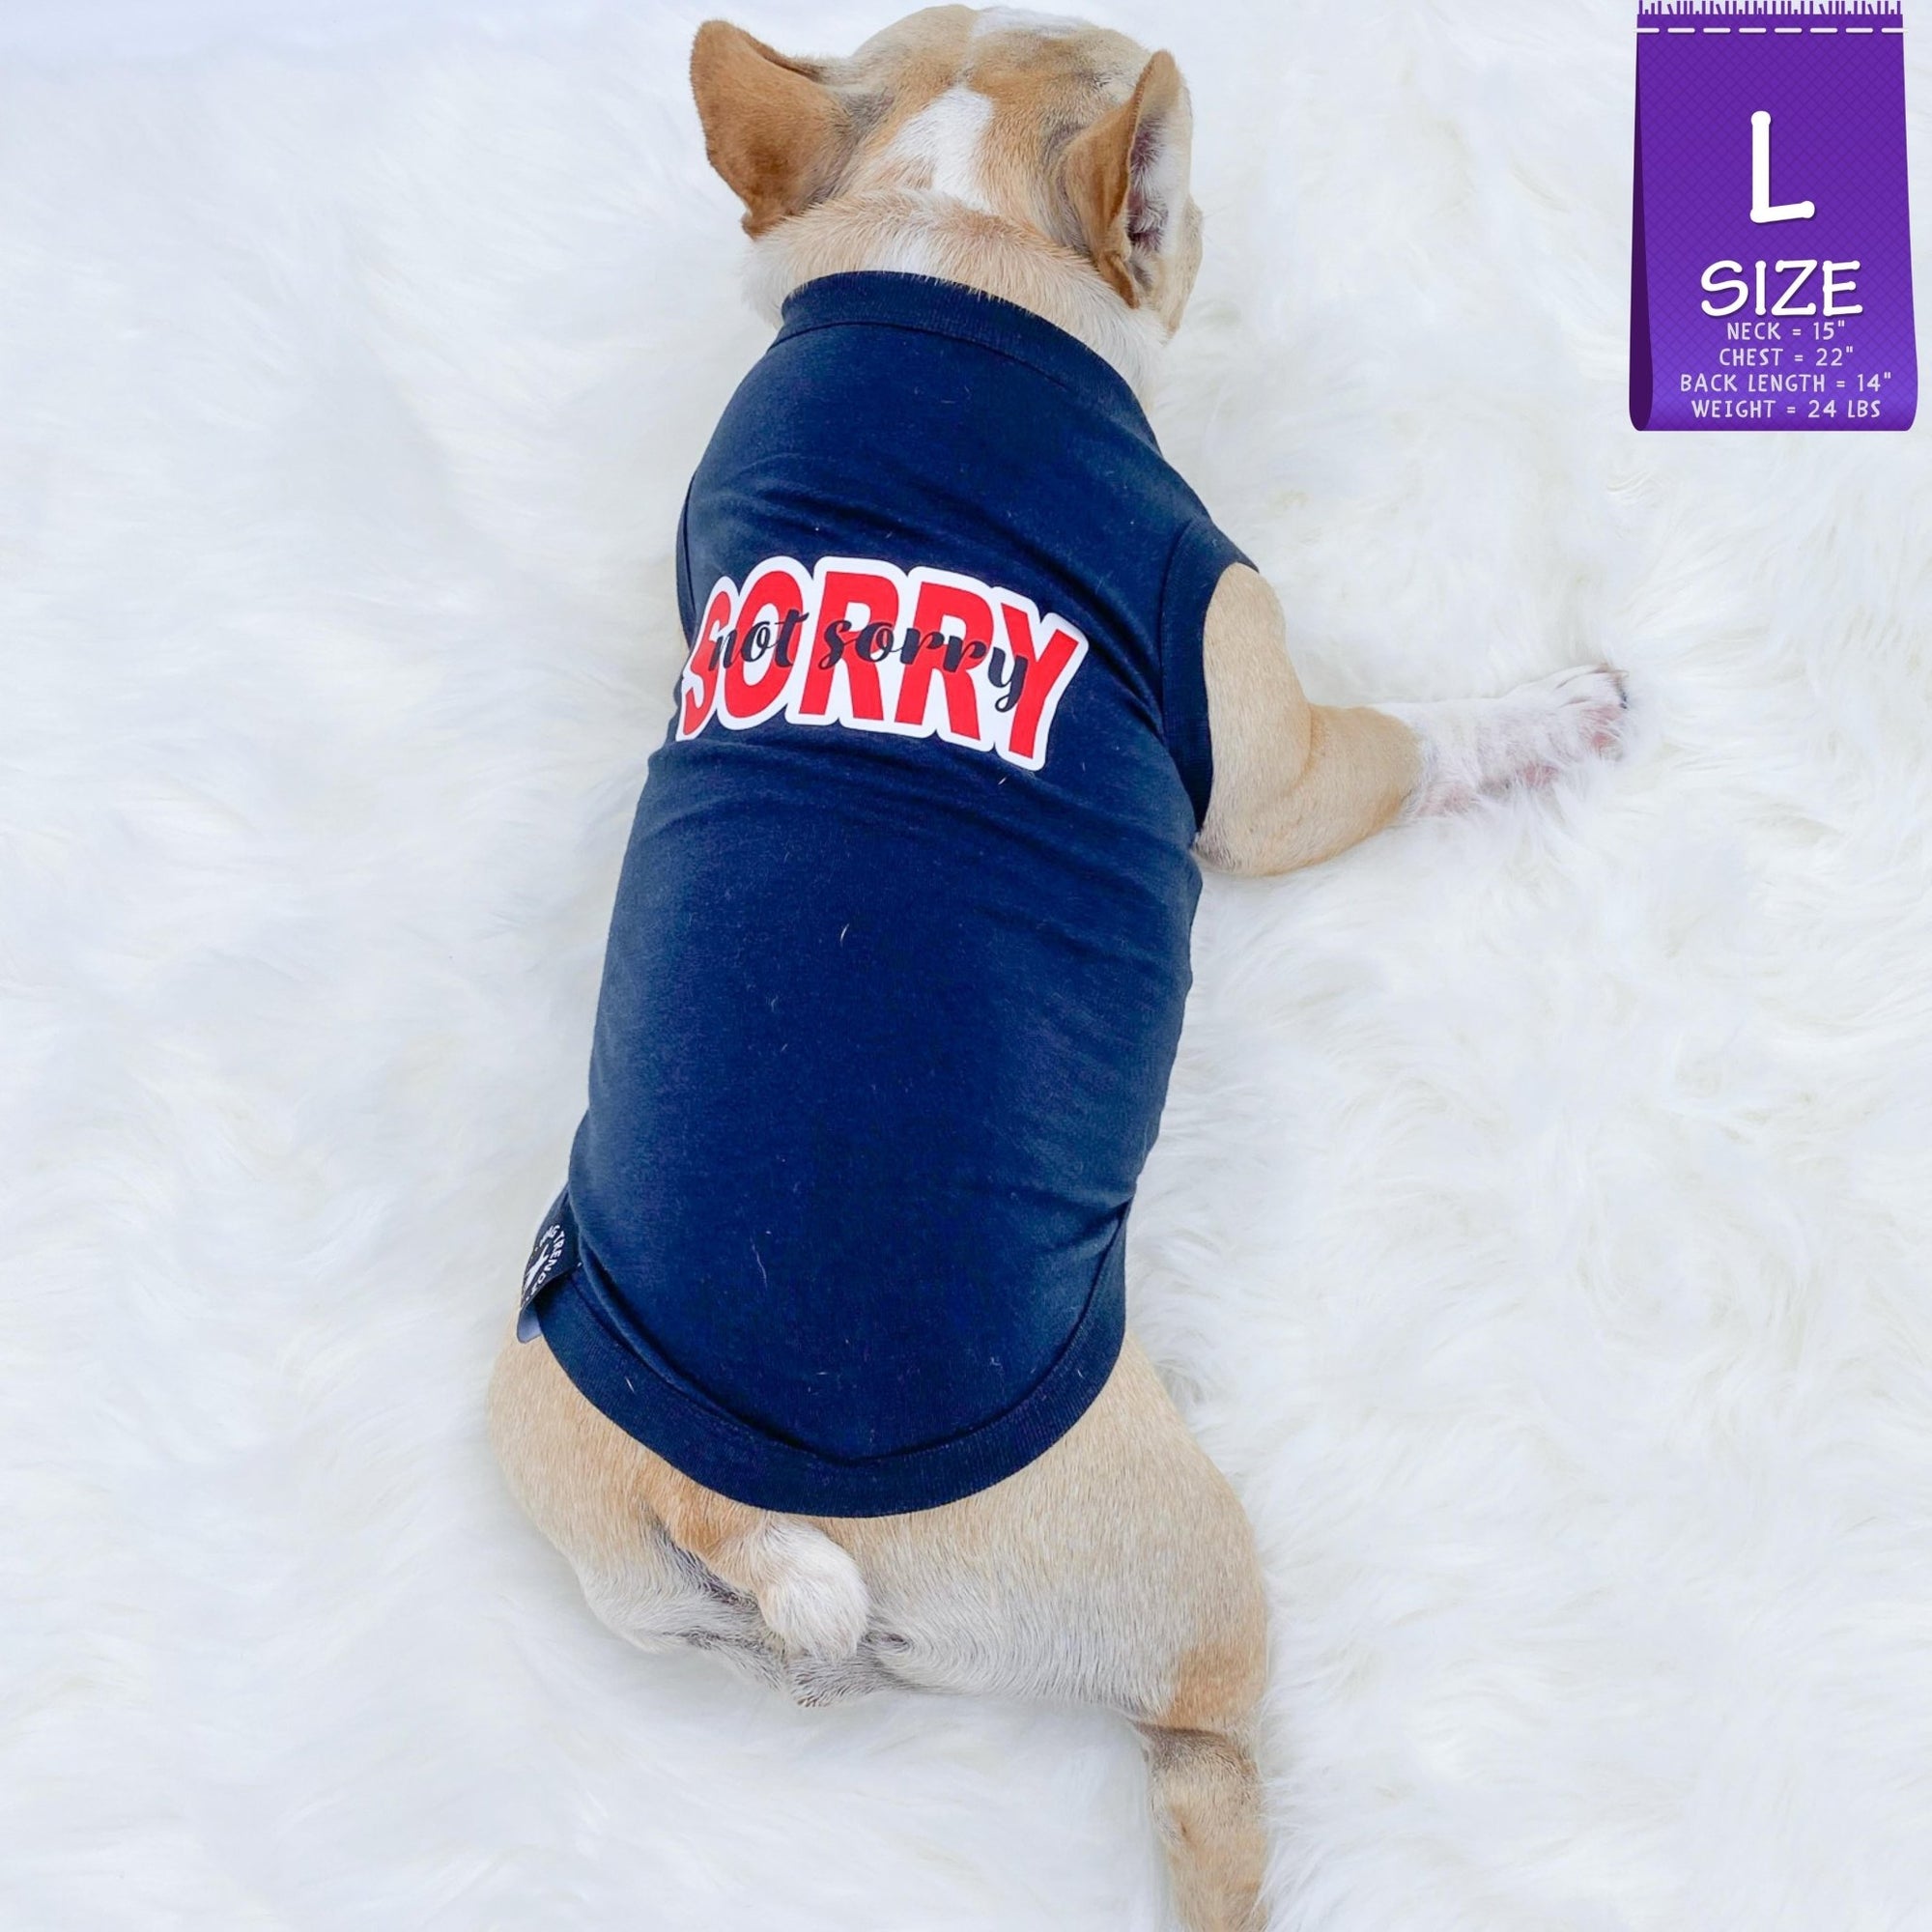 Dog T-Shirt - French Bulldog wearing &quot;Sorry Not Sorry&quot; black dog t-shirt with red and white lettering on back - against solid white background - Wag Trendz